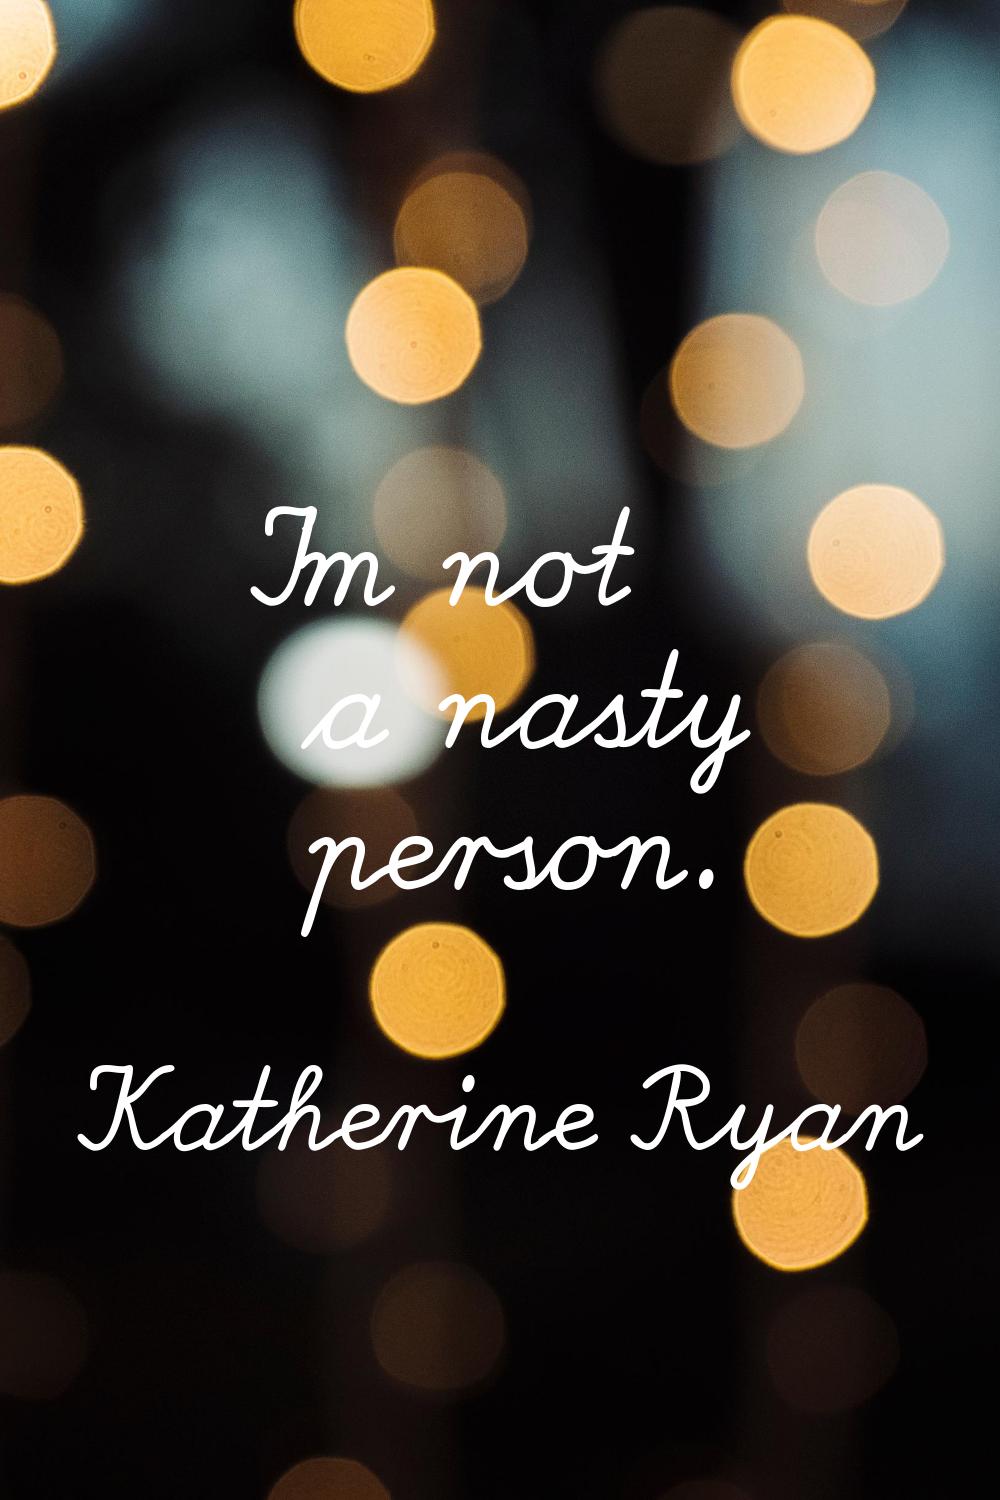 I'm not a nasty person.